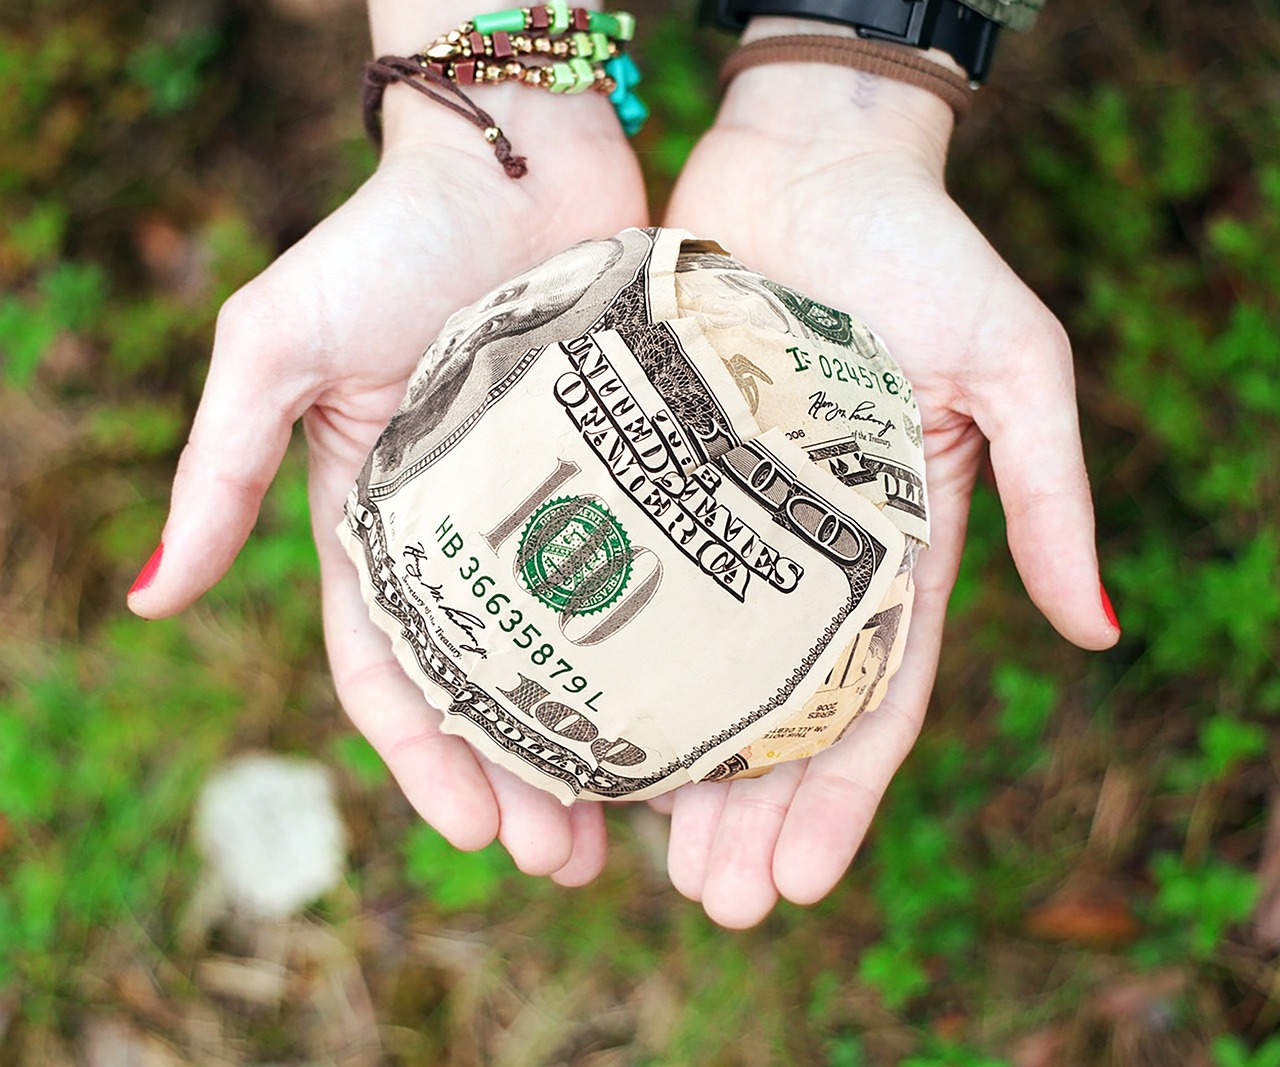 Tax Implications of Crowdfunding